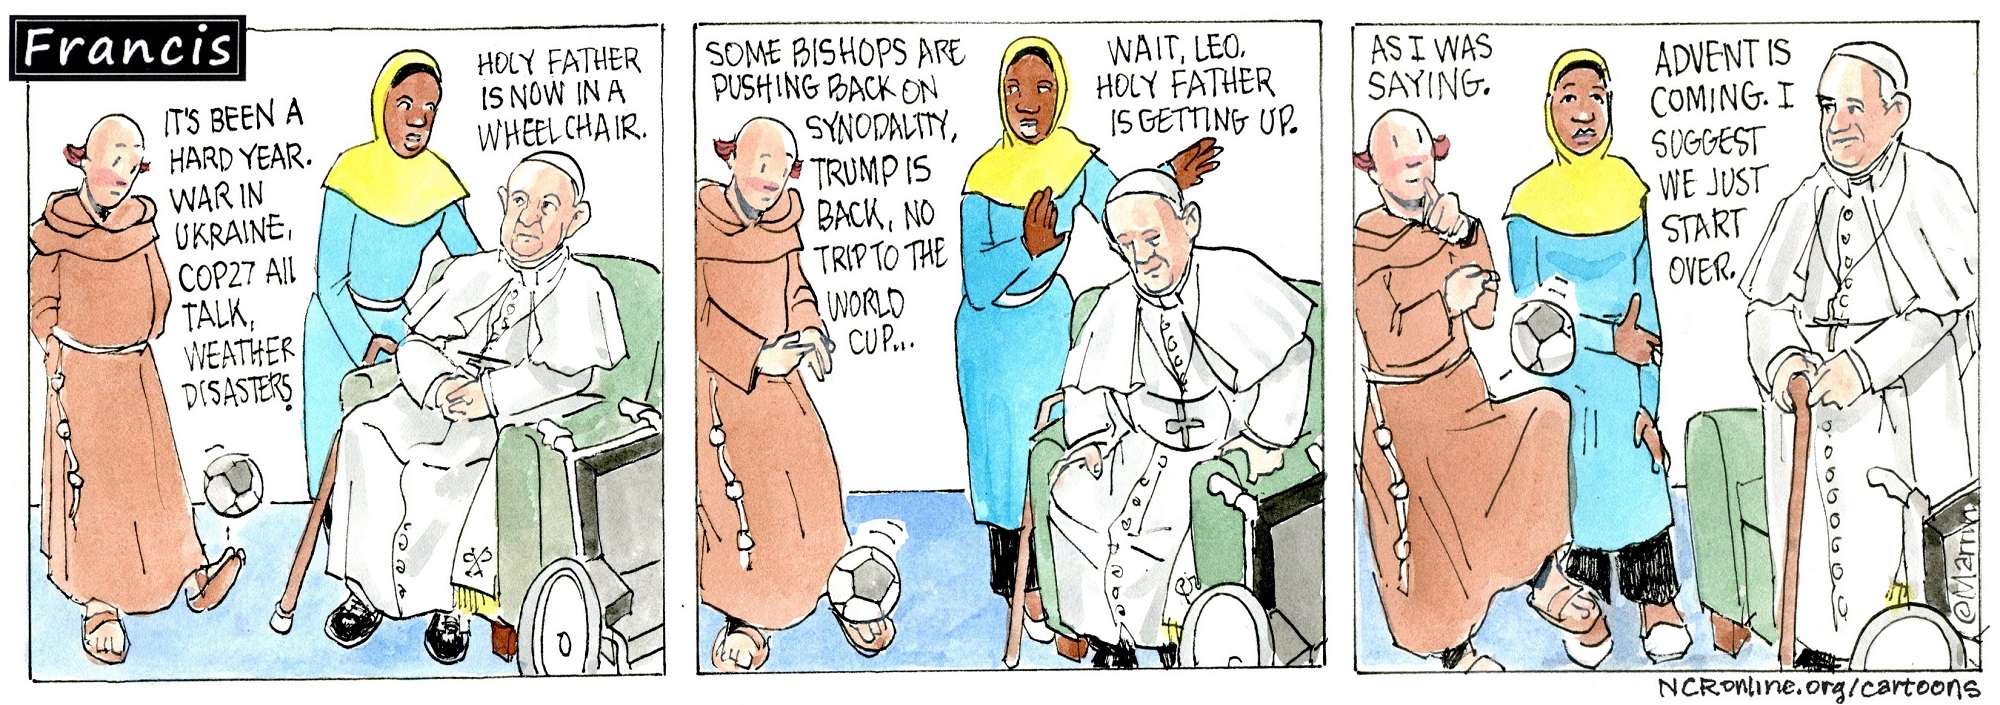 Francis, the comic strip: With Advent coming, Francis suggests it's time to start over.